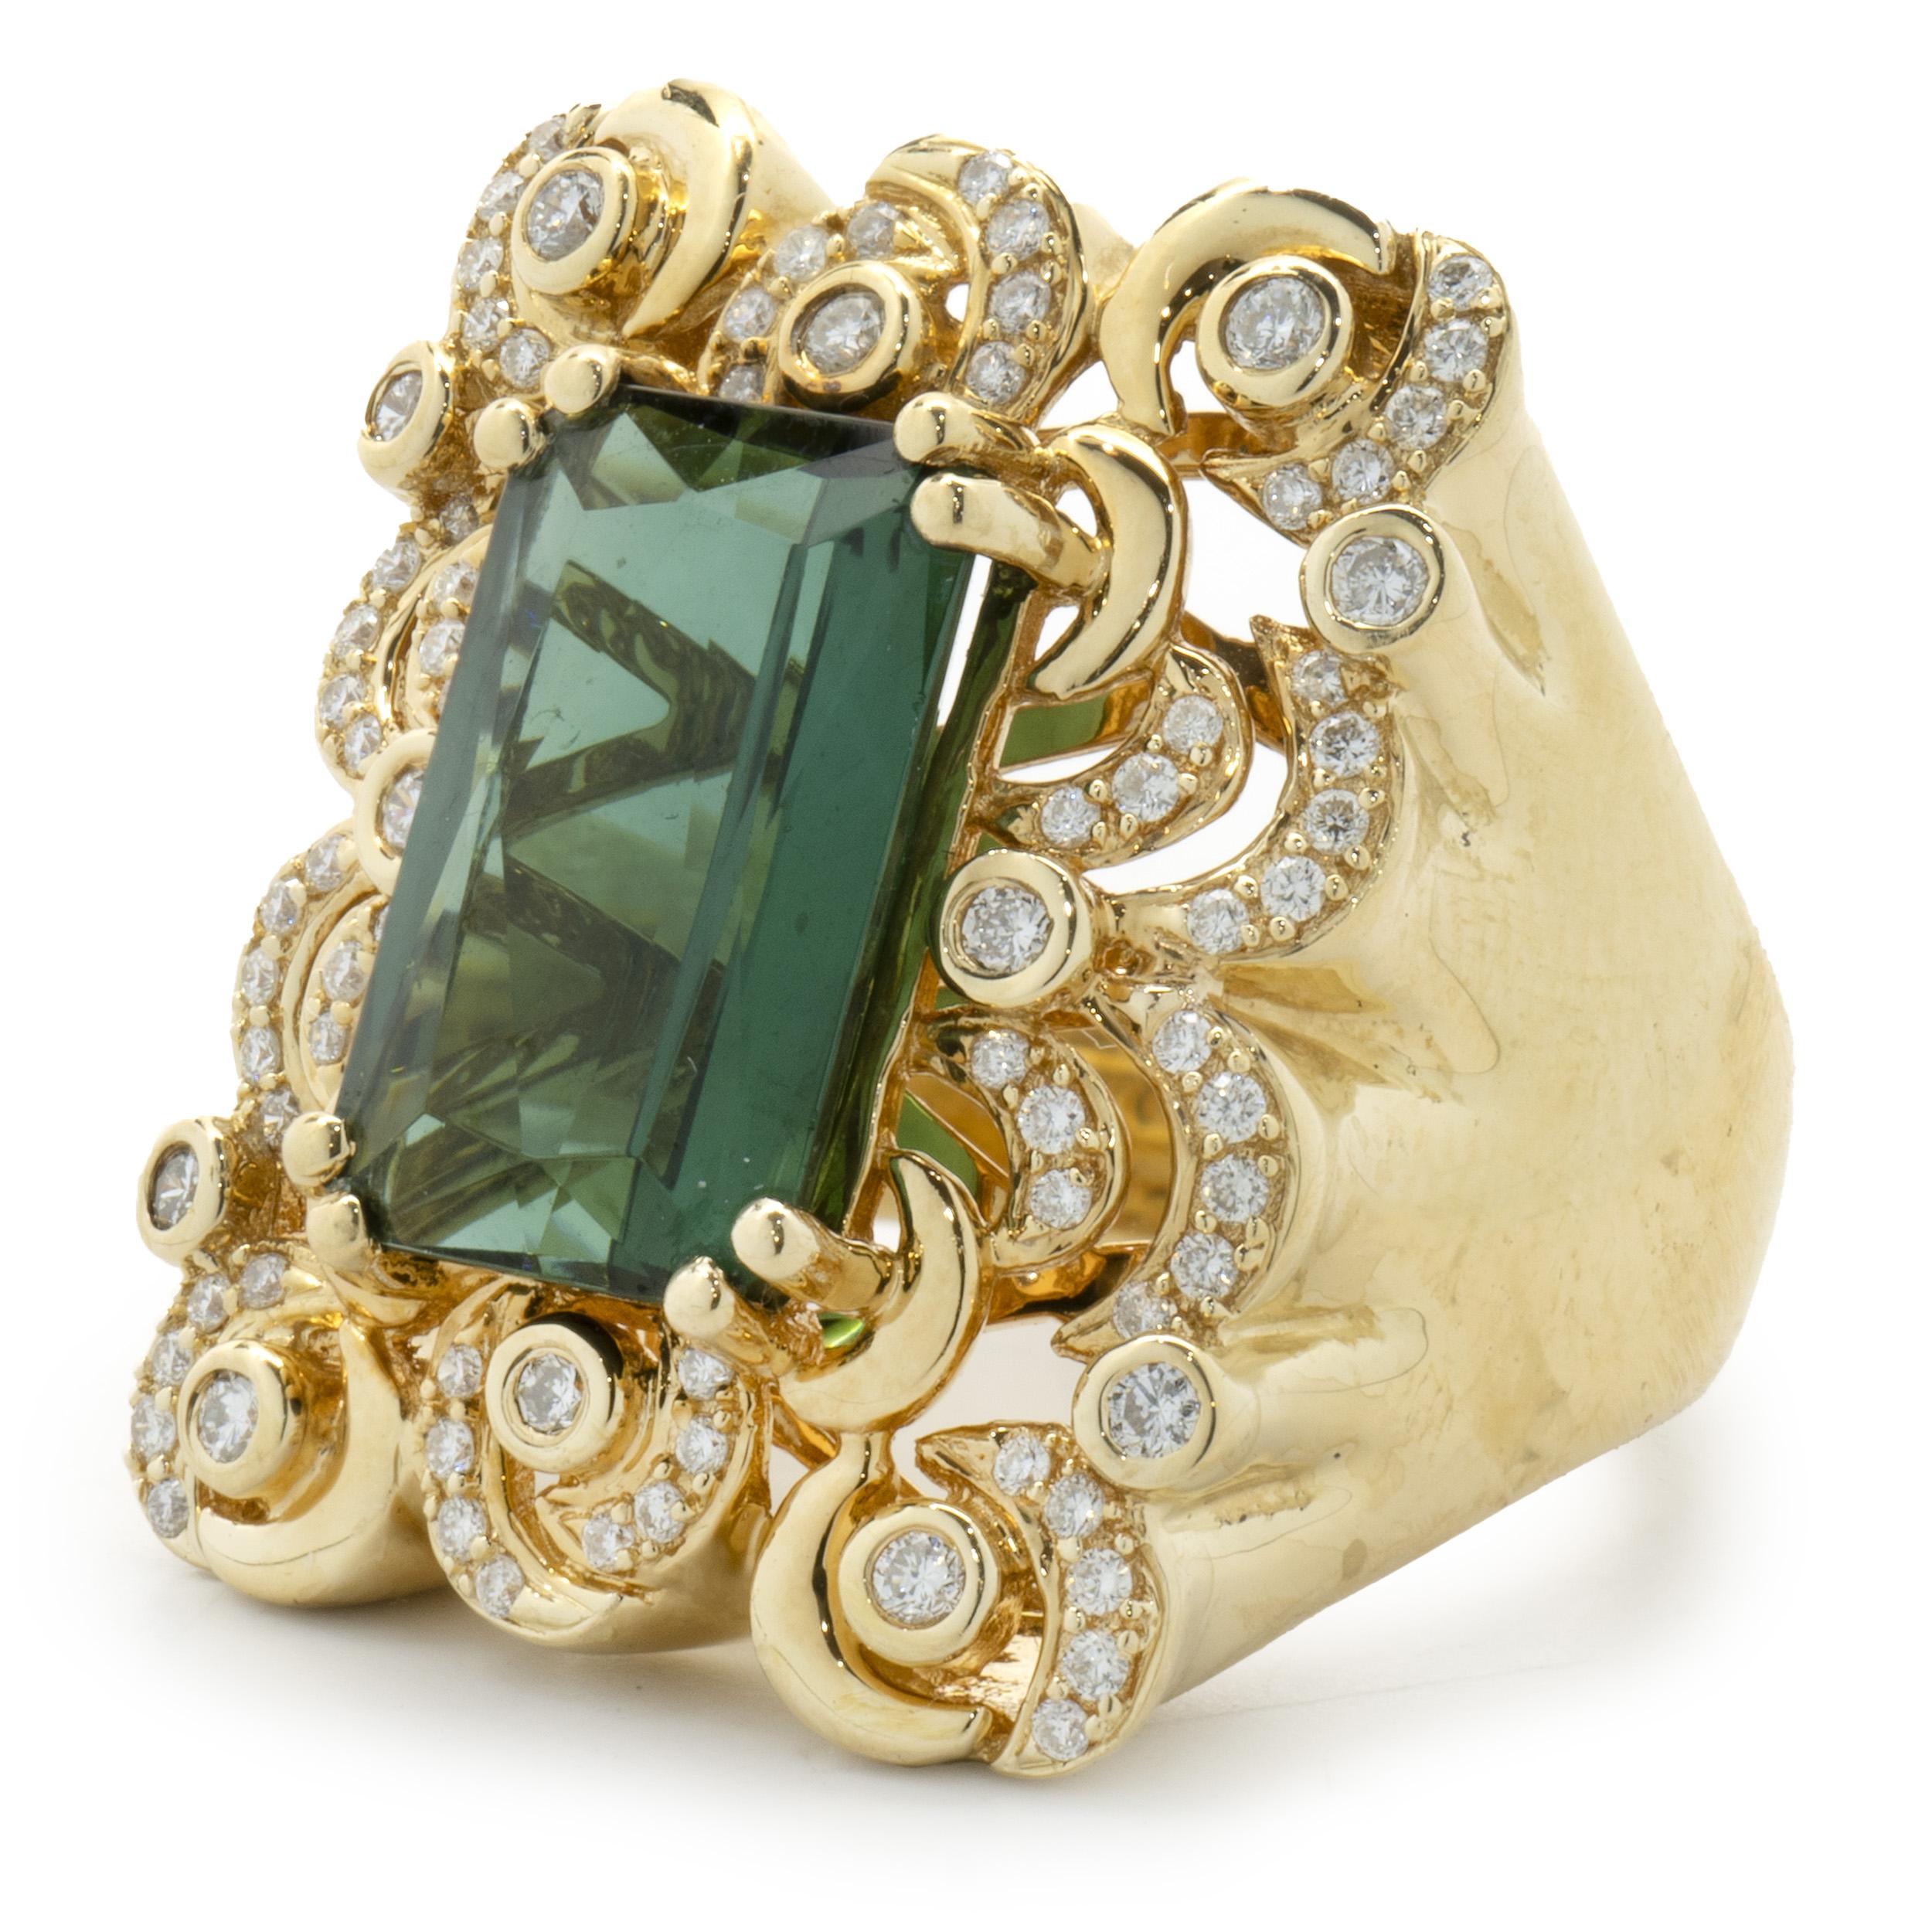 Designer: custom design
Material: 18K yellow gold
Diamond: 68 round brilliant cut = 0.68cttw
Color: G
Clarity: VS1-2
Green Tourmaline: 1 emerald cut = 5.00ct
Dimensions: ring top measures 25mm wide
Ring Size: 7 (please allow two extra shipping days